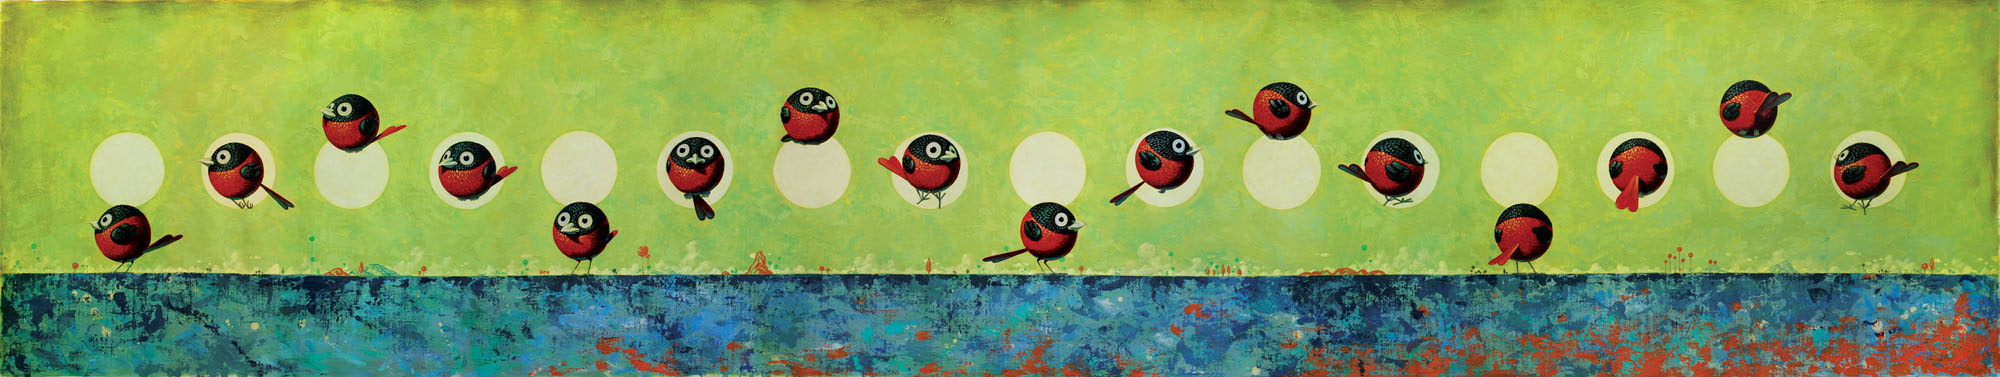 © Paolo Rui; painting; acrylic and oil on canvas; surreal; birds; Red Oriole; Tour of the world; Taiwanese birds; curiosity